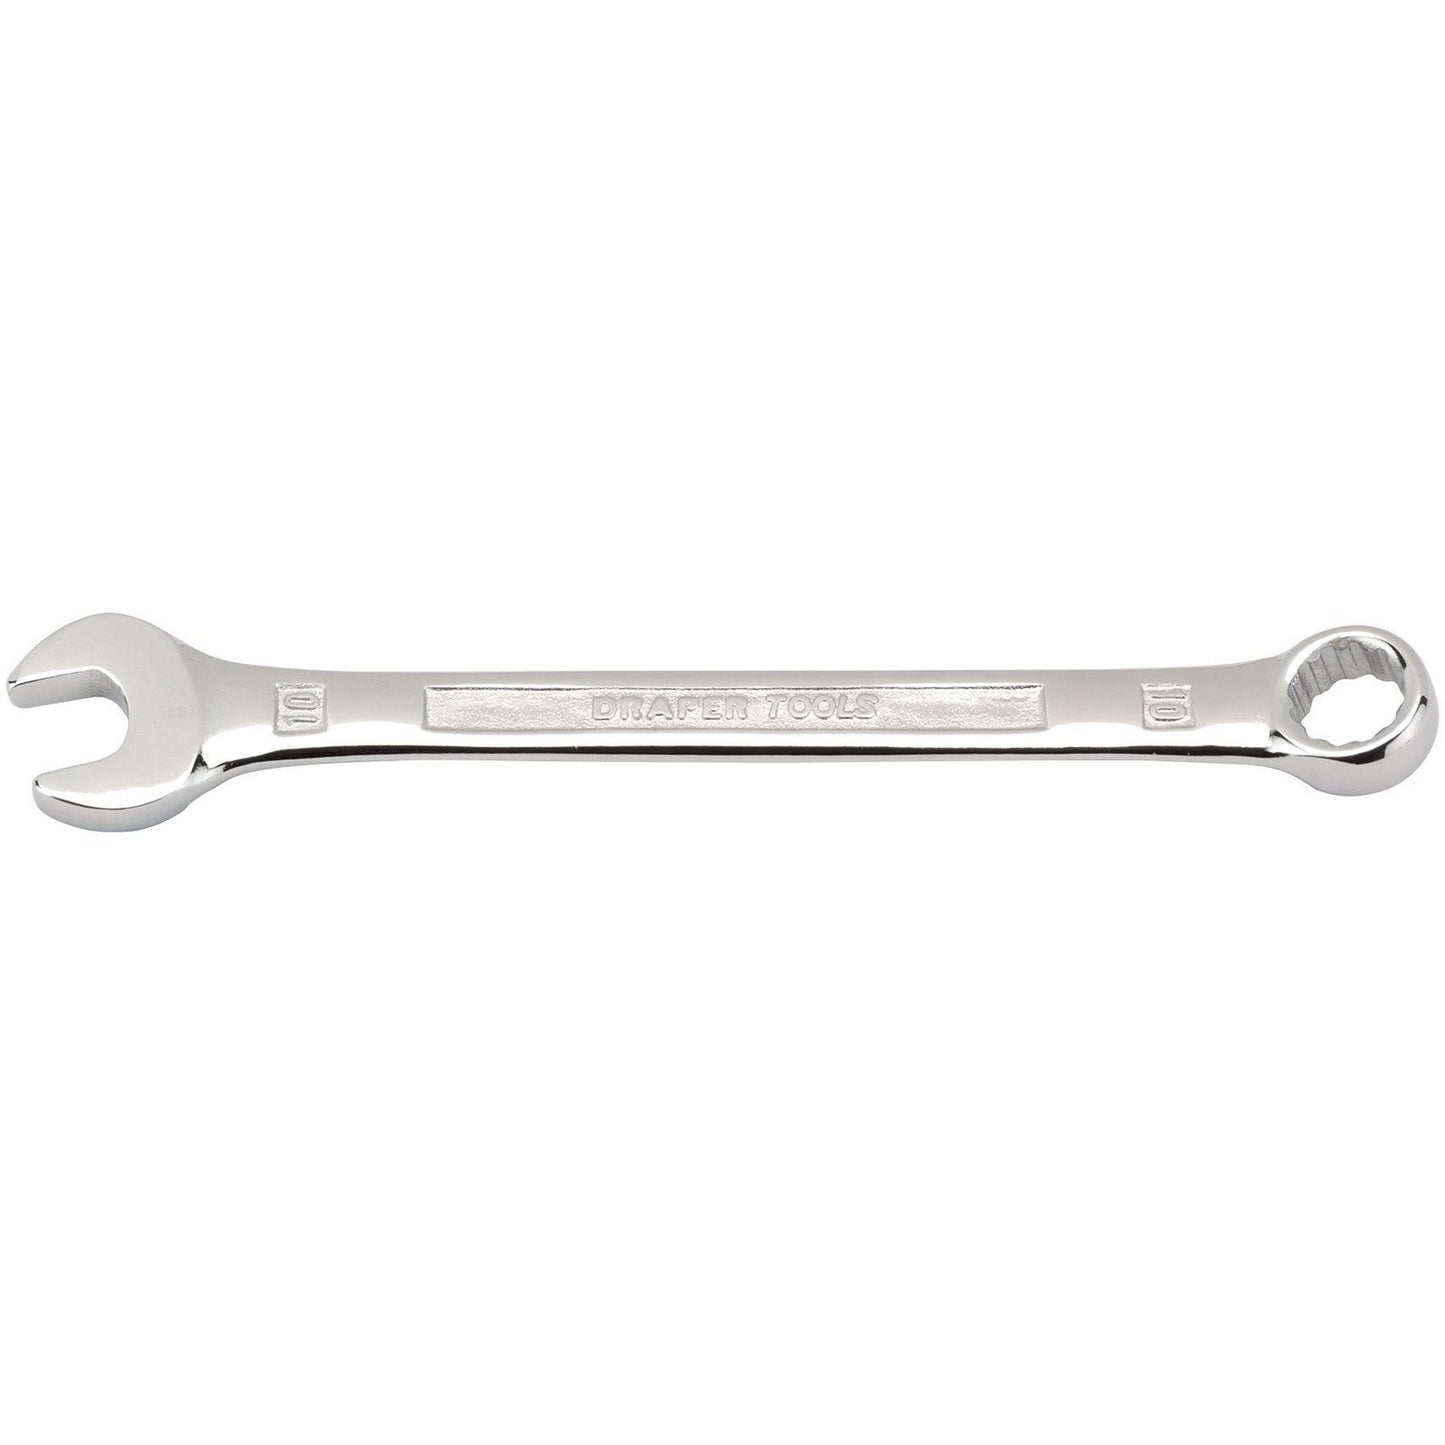 10 mm Draper Combination Spanner [35352] Hardened and Tempered